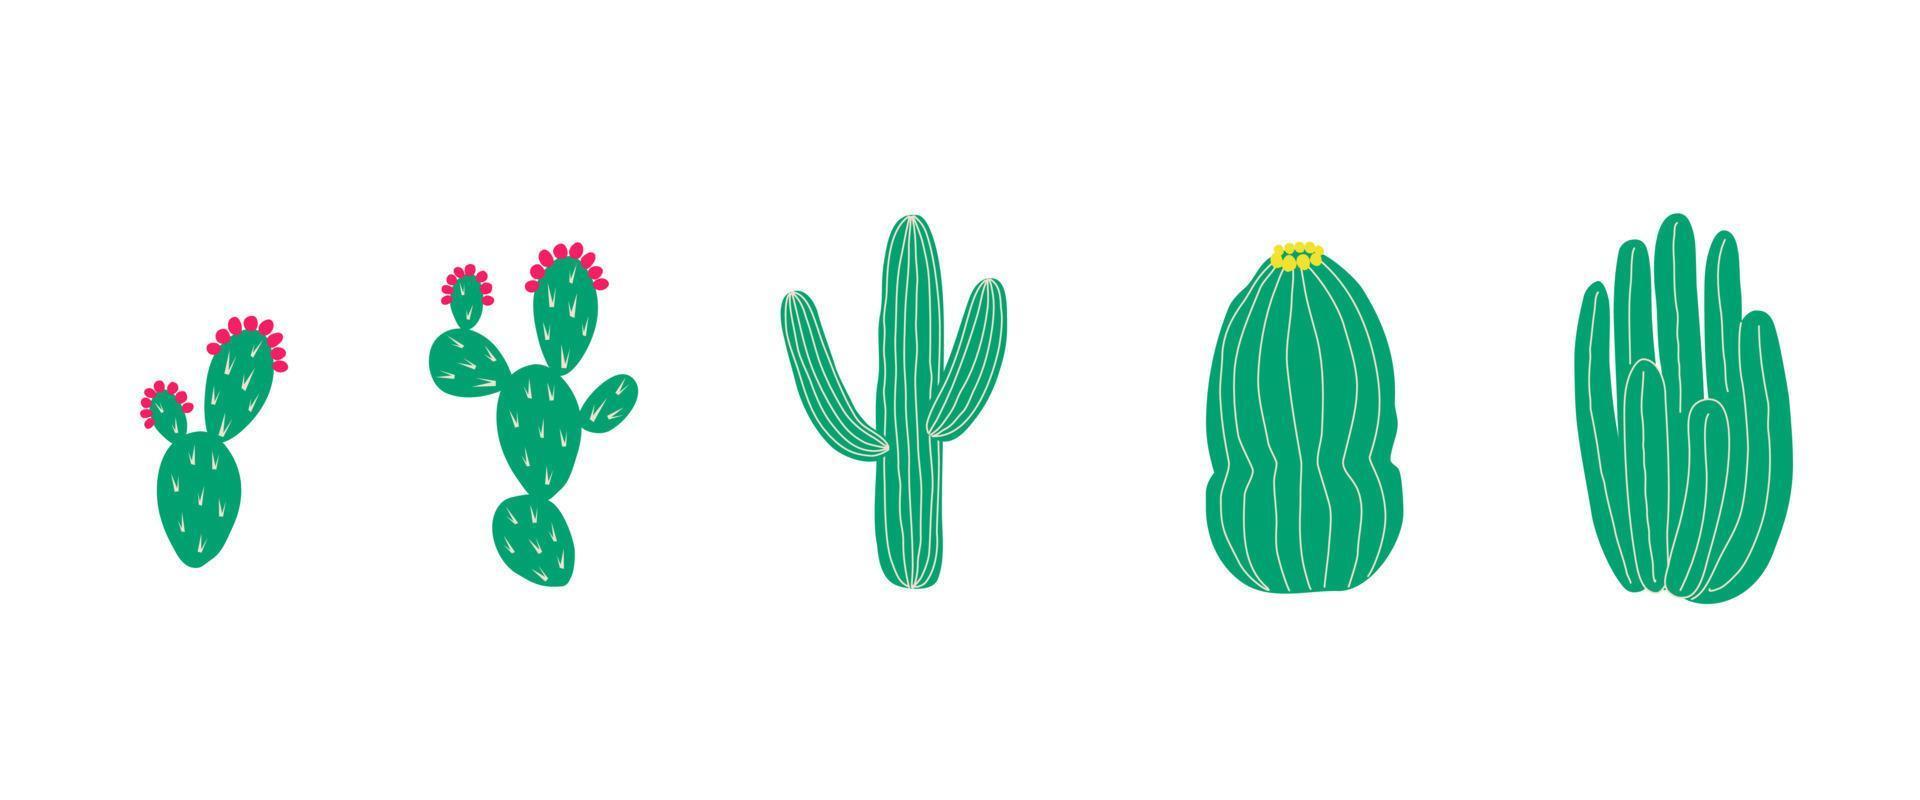 Various cactus flat vector illustration. Set of succulent. Wild outdoor desert and indoor home plants. Design elements for pattern, textile, sticker, banner, poster.